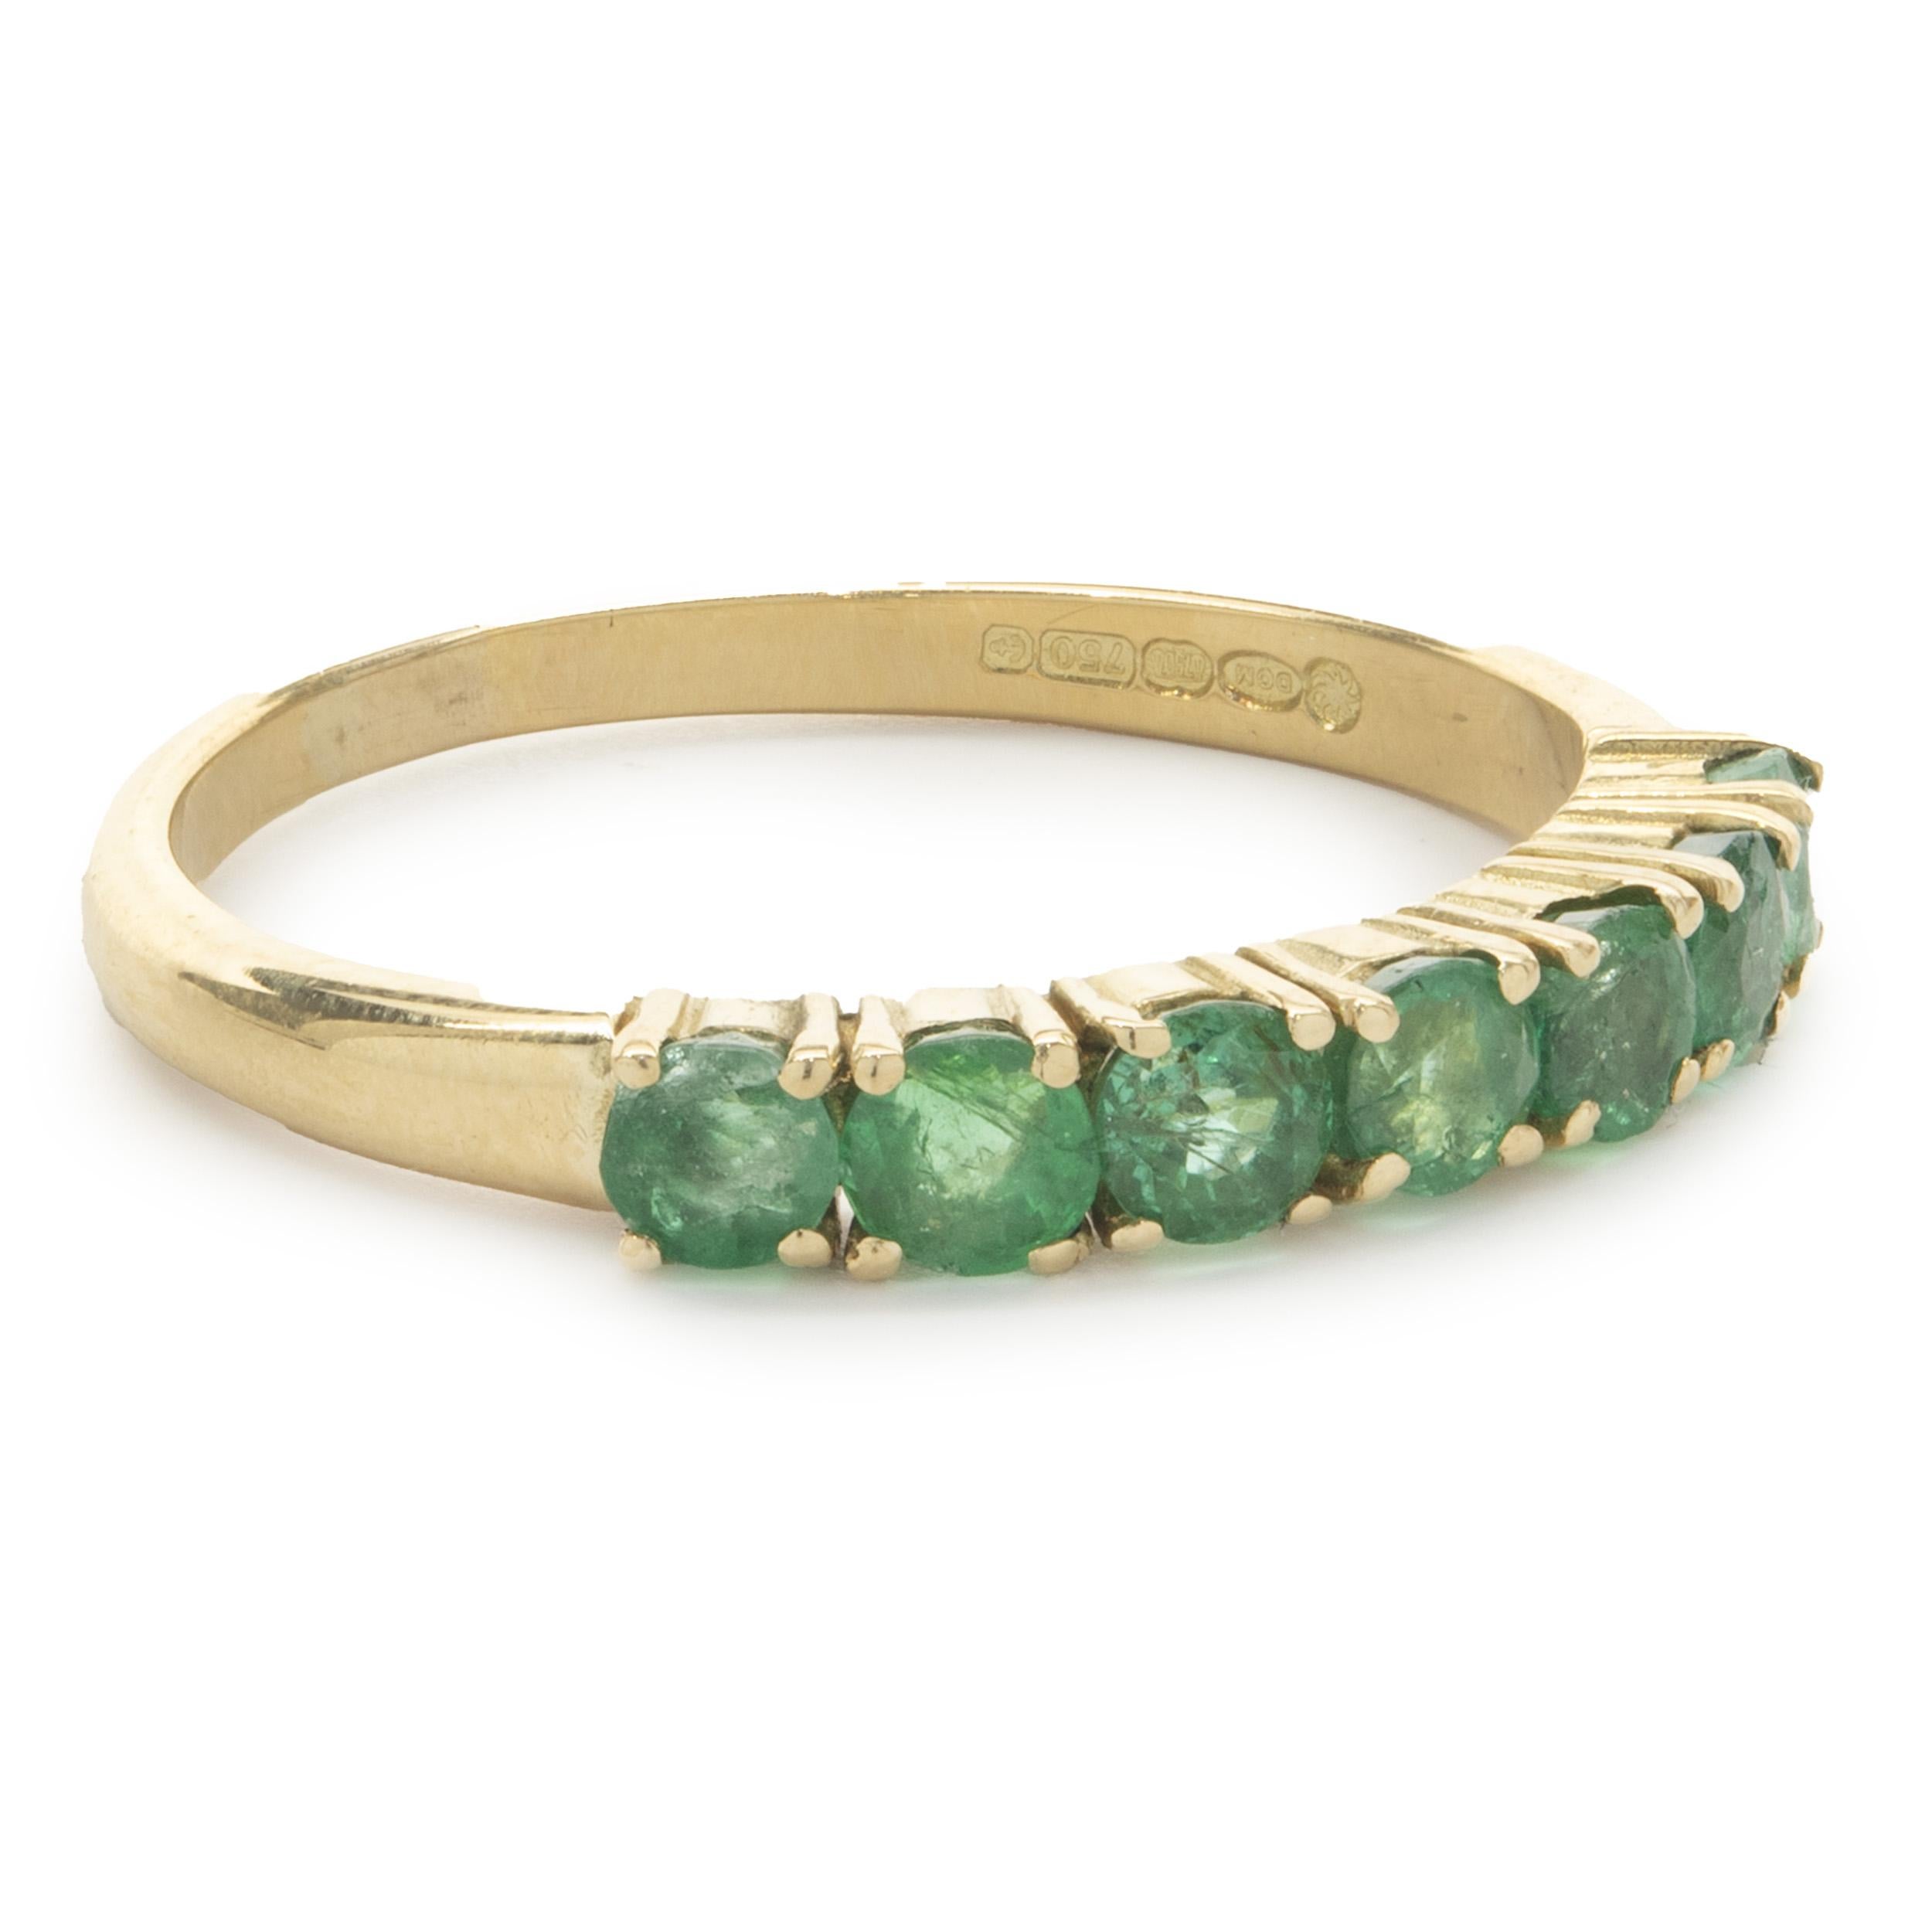 Designer: custom
Material: 14K yellow gold
Emerald: 7 round cut = 1.40cttw
Dimensions: ring top measures 3.32mm wide
Ring Size: 8.75 (complimentary sizing available)
Weight: 3.19 grams